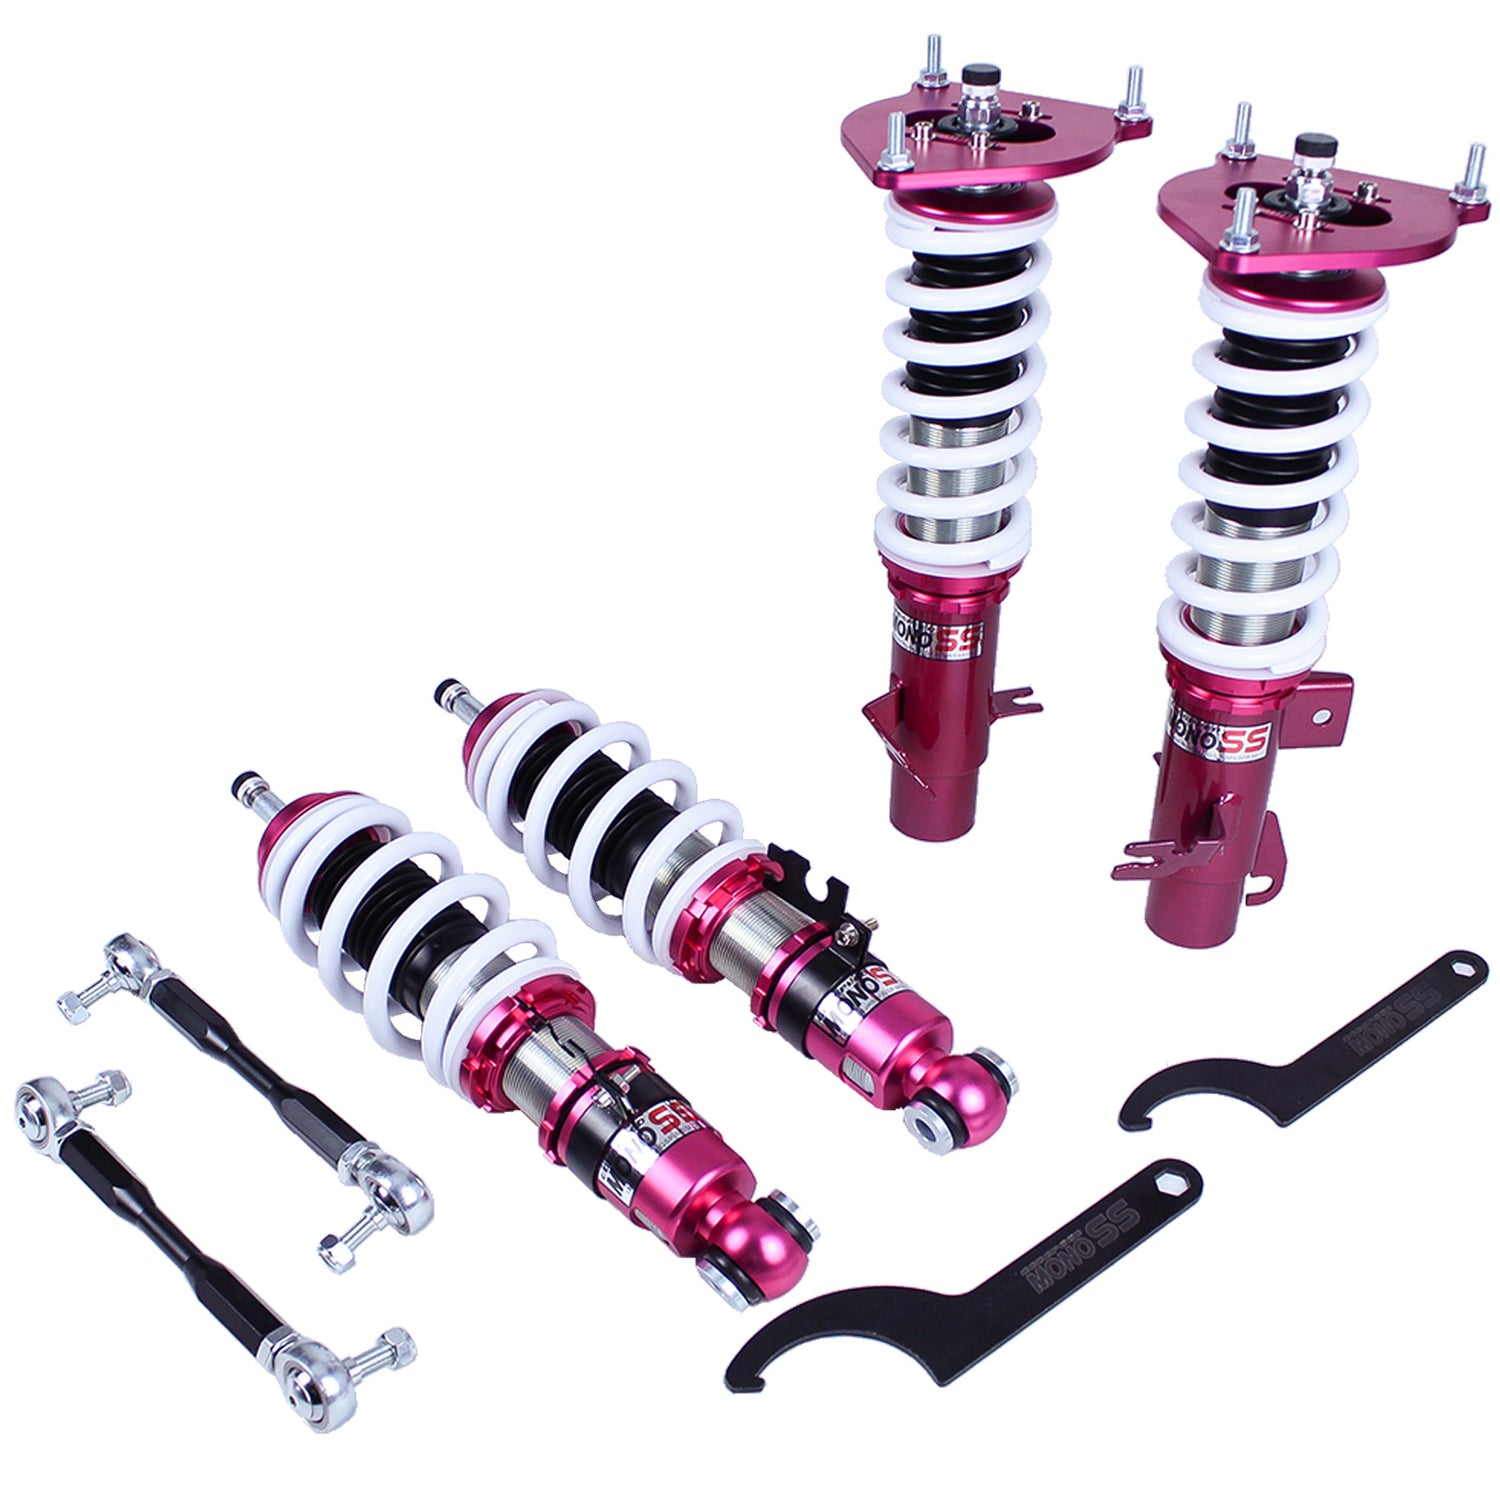 Godspeed MSS0820-A MonoSS Coilover Lowering Kit, Fully Adjustable, Ride Height, Spring Tension And 16 Click Damping, MINI Cooper S(R53) 2002-06